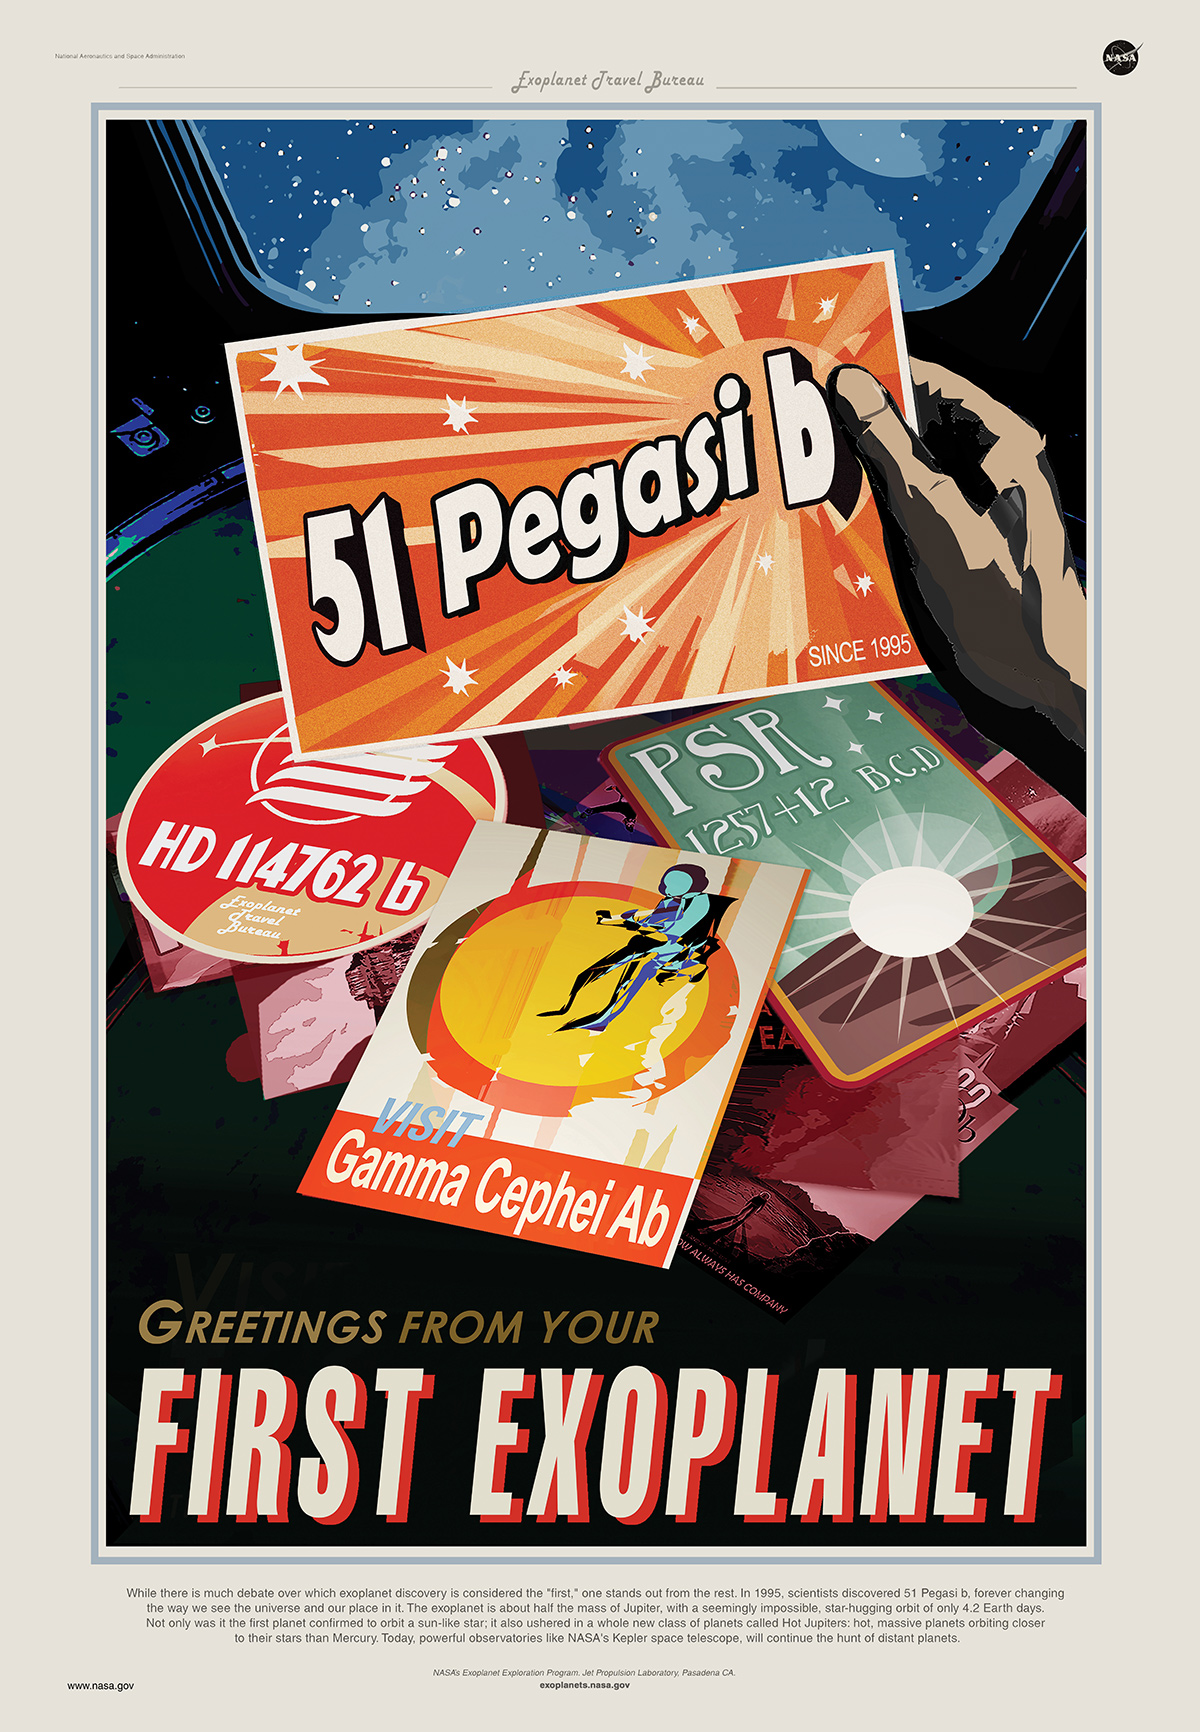 Greetings from your First Exoplanet